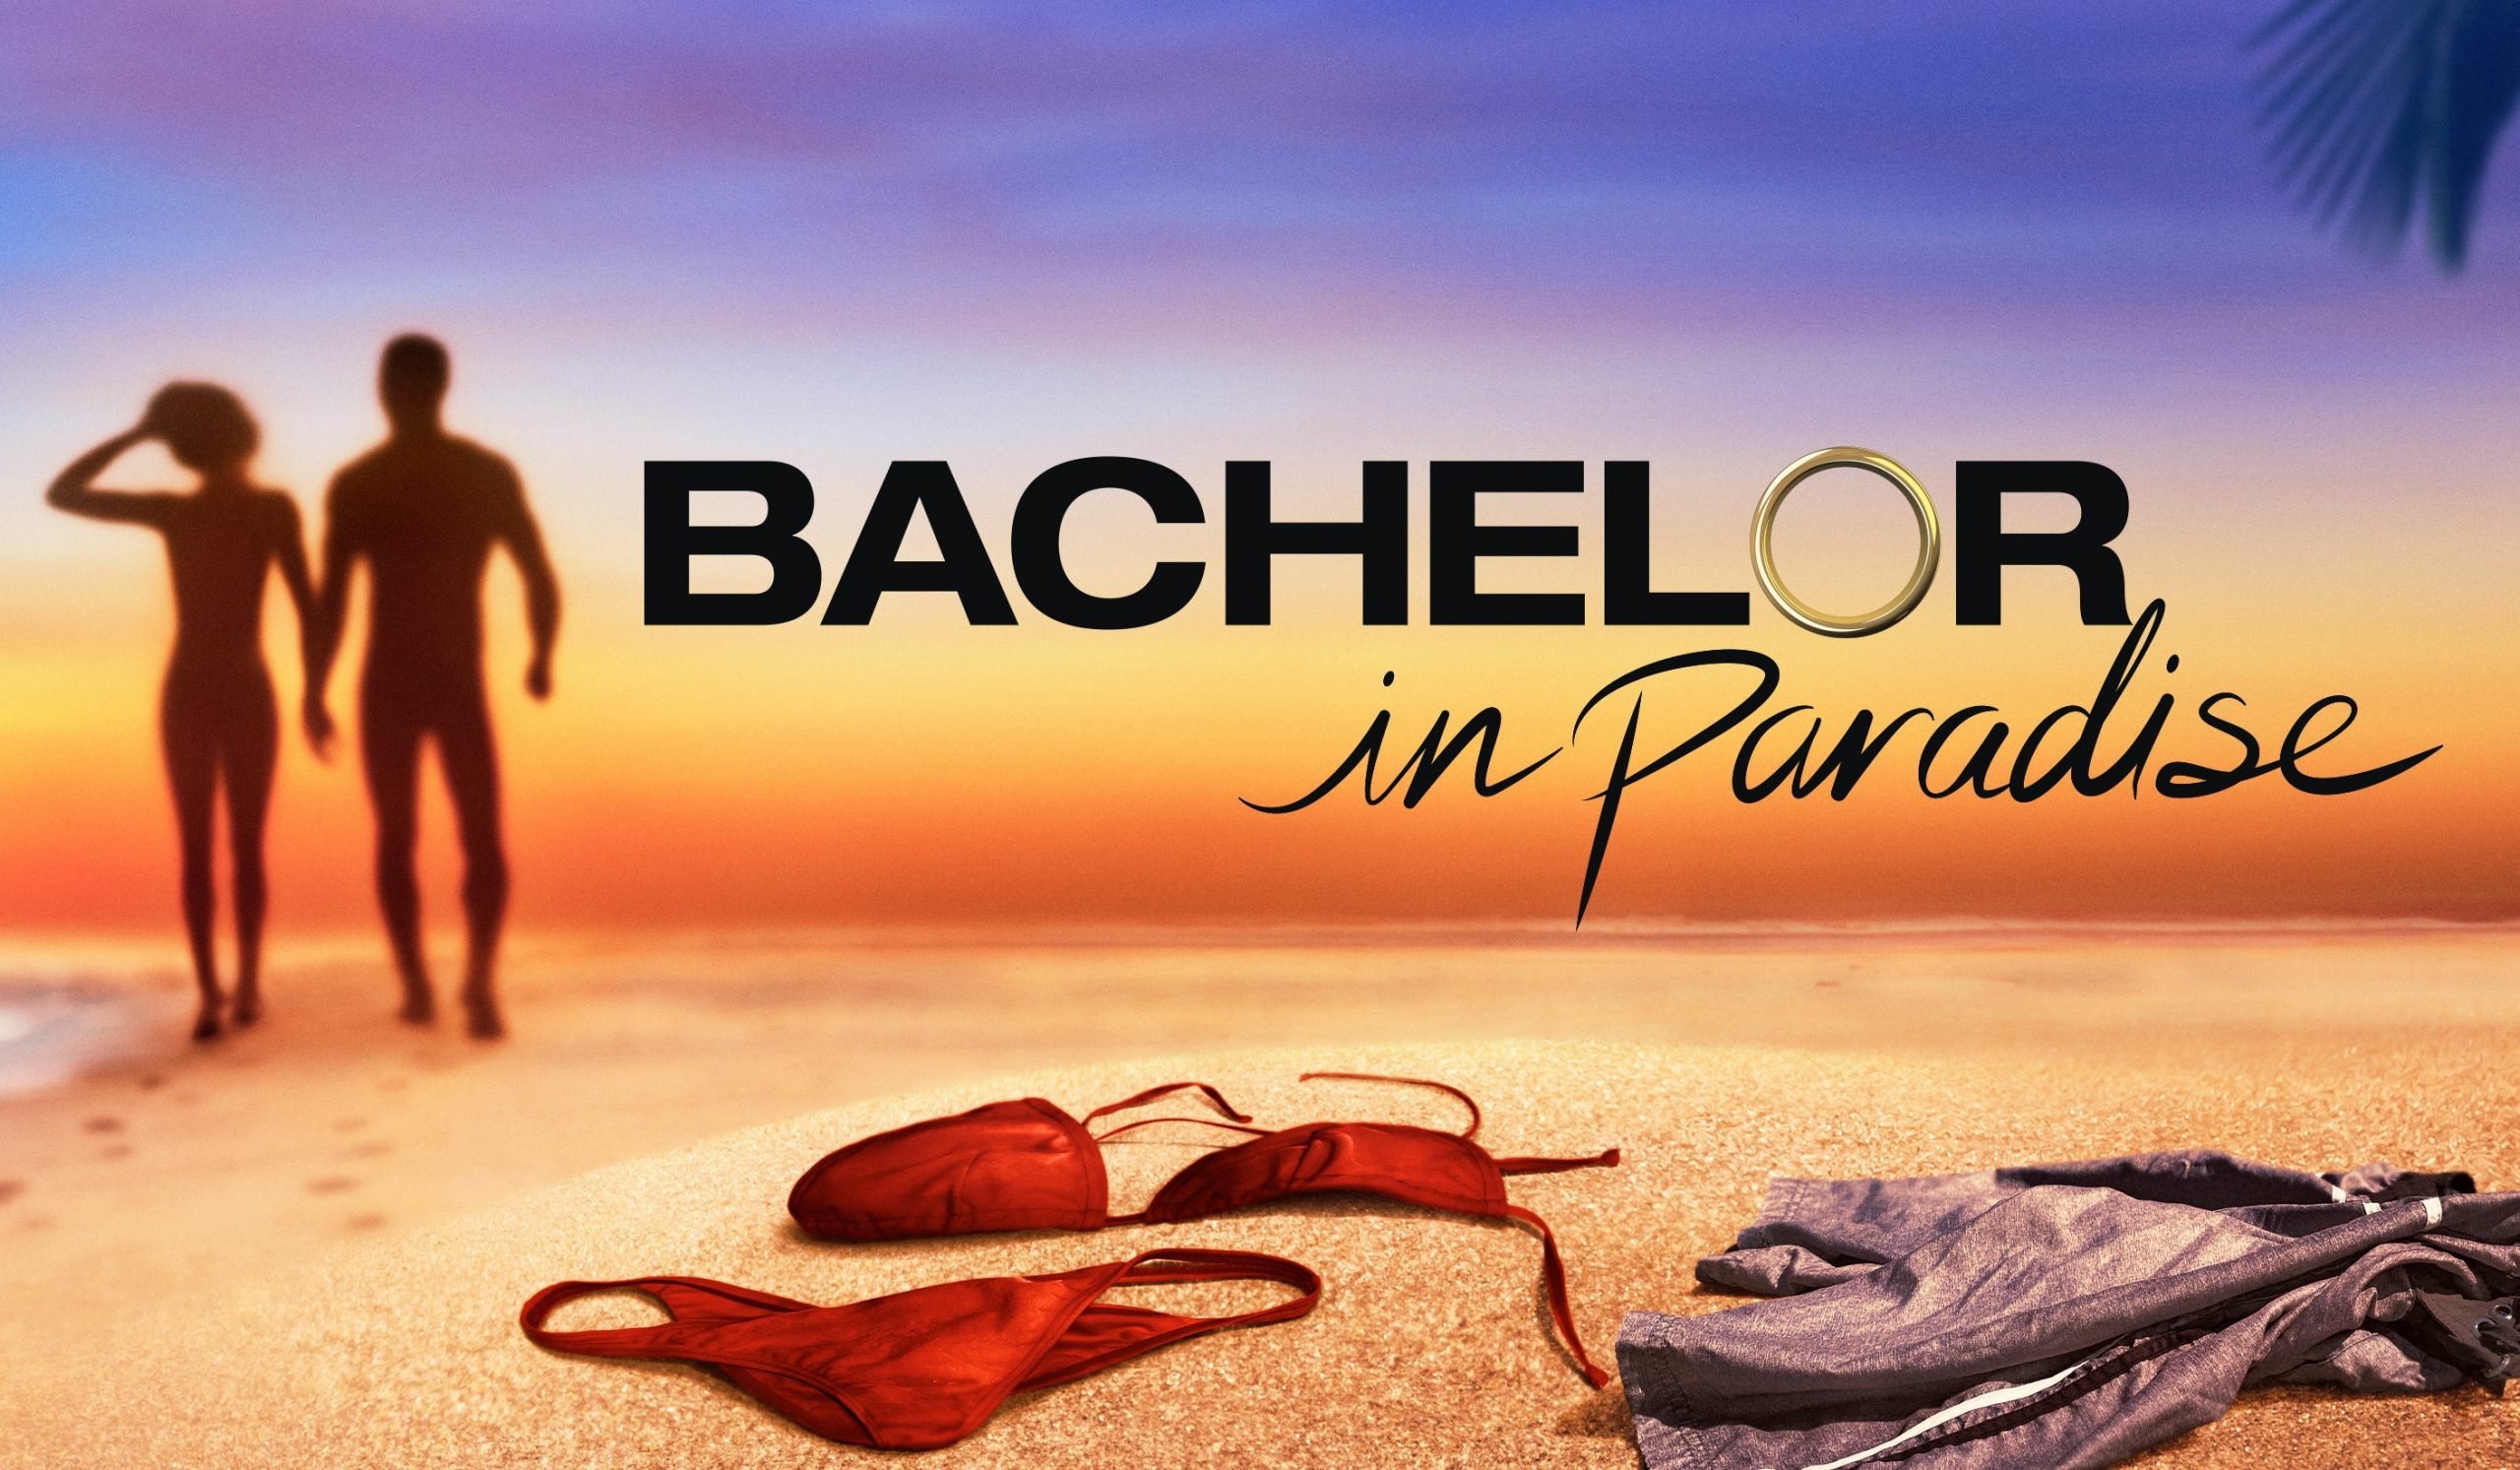 'Bachelor in Paradise' 2022 Spoilers Which Couples Get Engaged, Stay